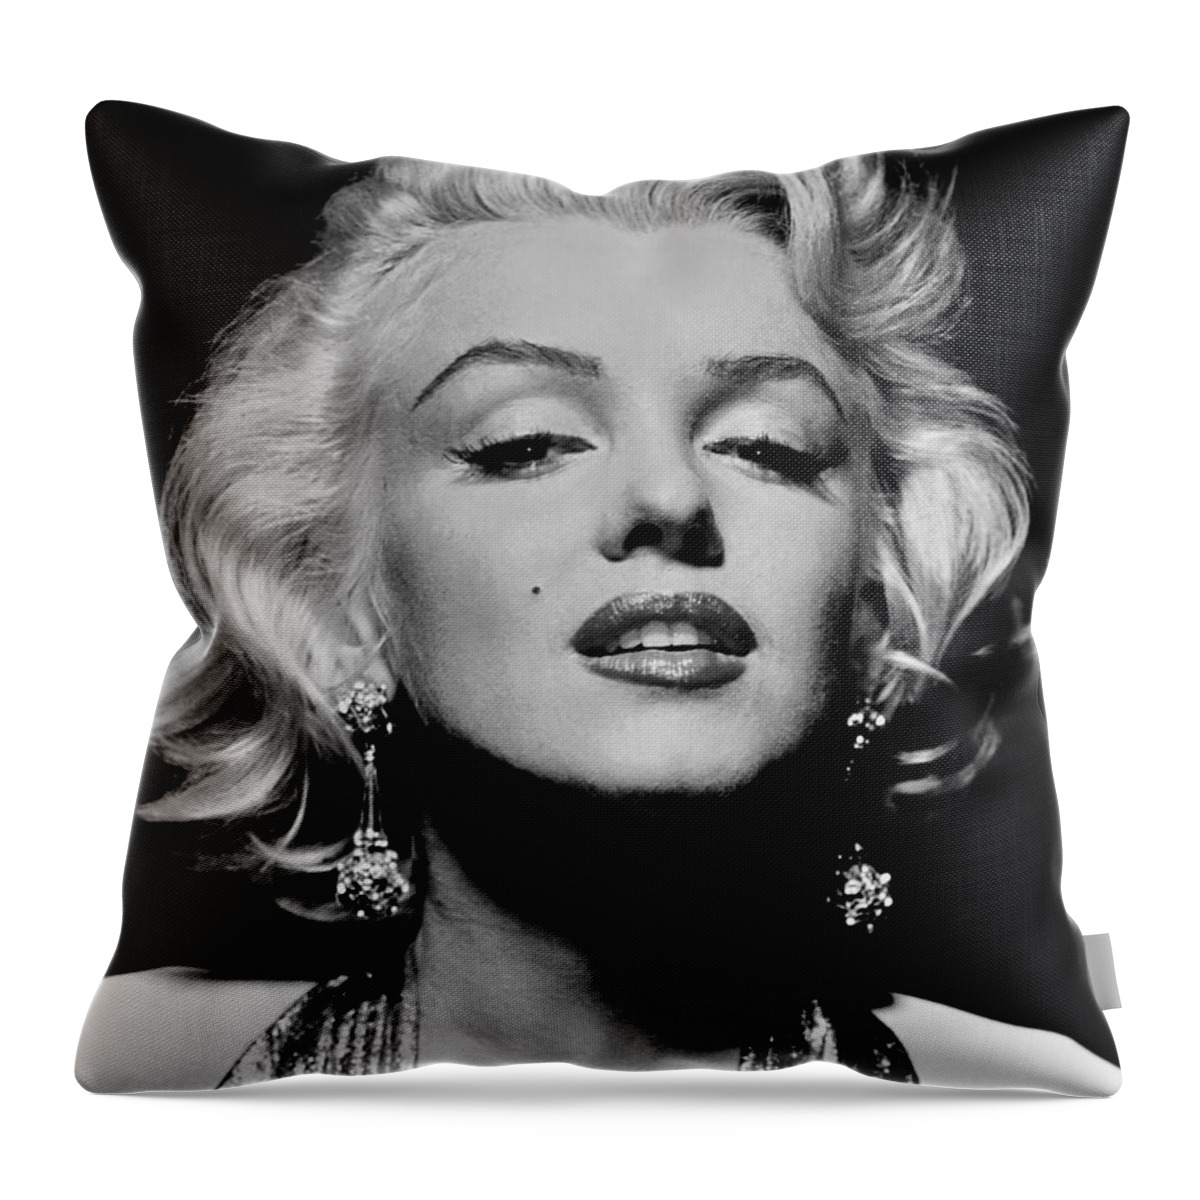 Marilyn Monroe Throw Pillow featuring the photograph Marilyn Monroe Black and White by Marilyn Monroe